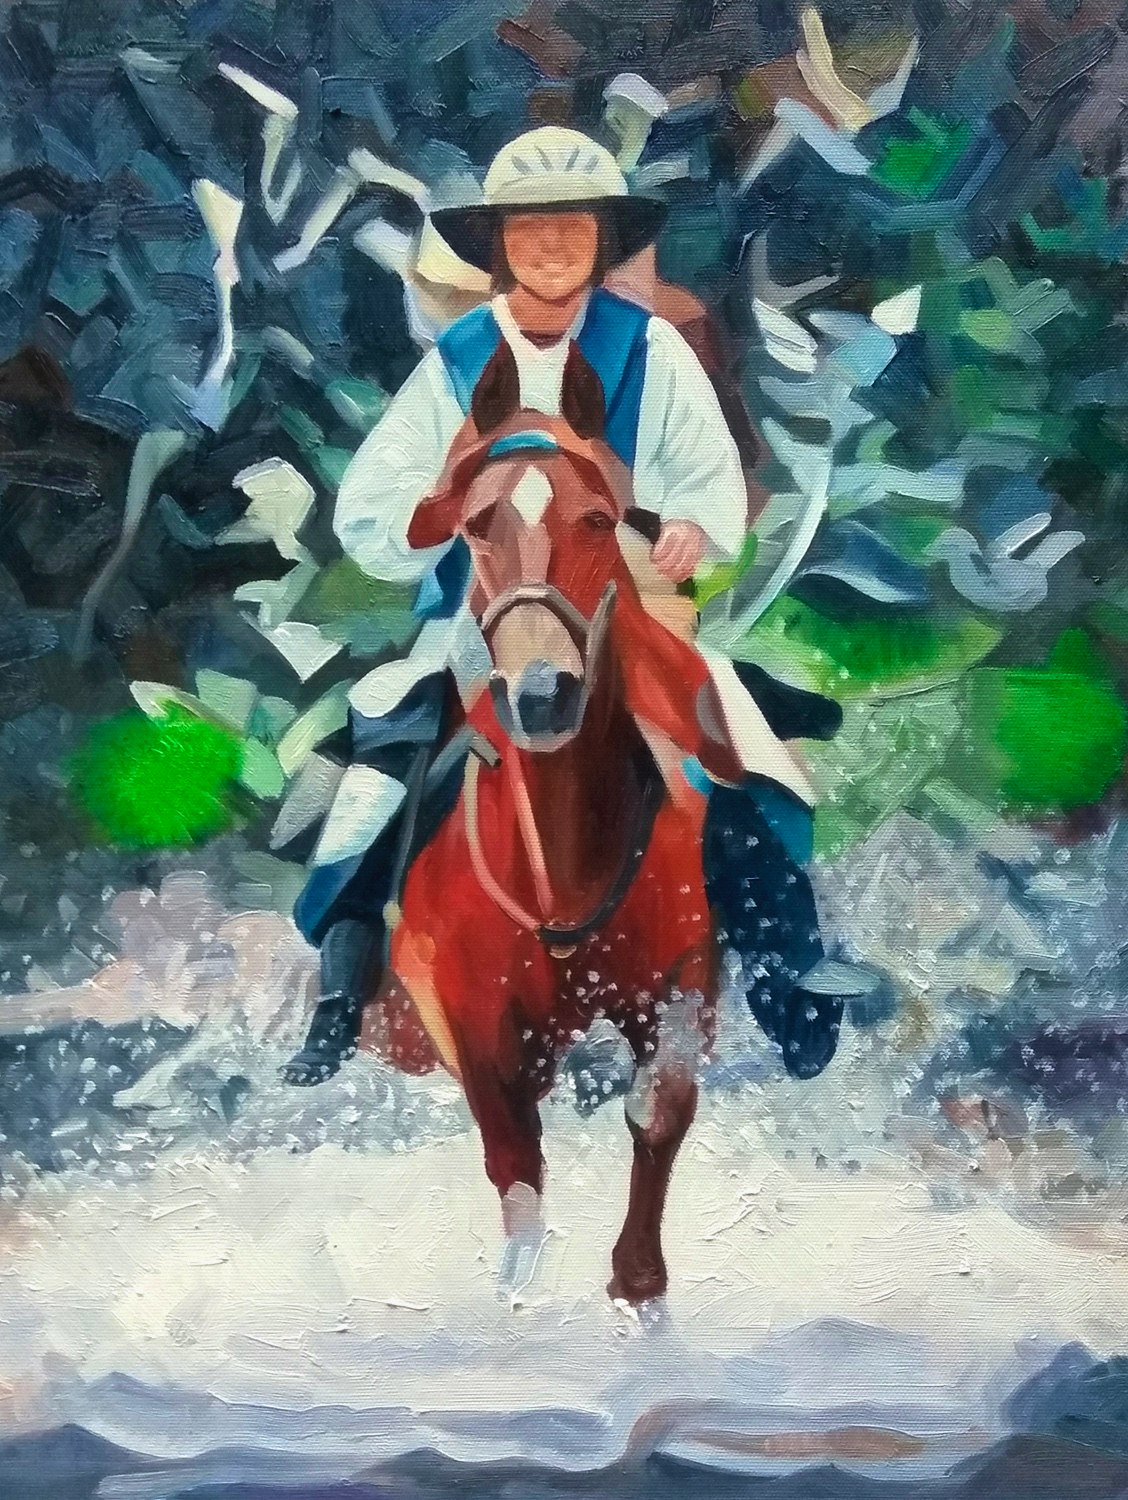 Oil painting of a girl riding a horse painted in the style of Young American Girl by Francis Picabia